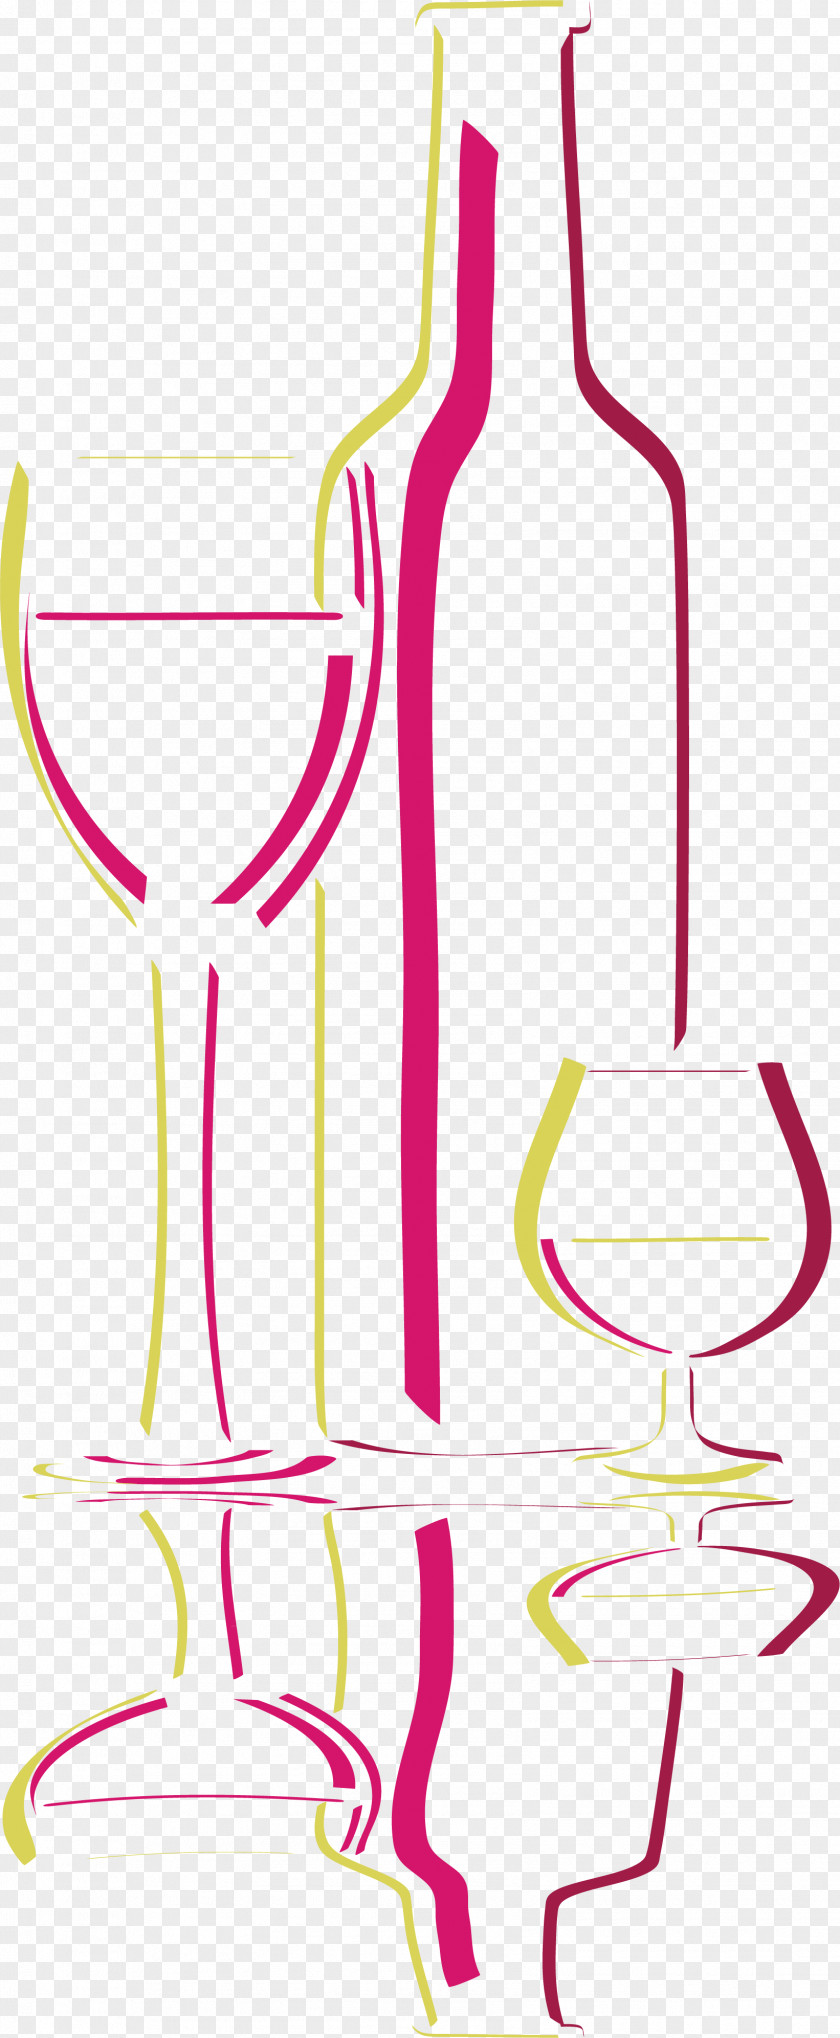 Creative Wine Glass Bottle PNG